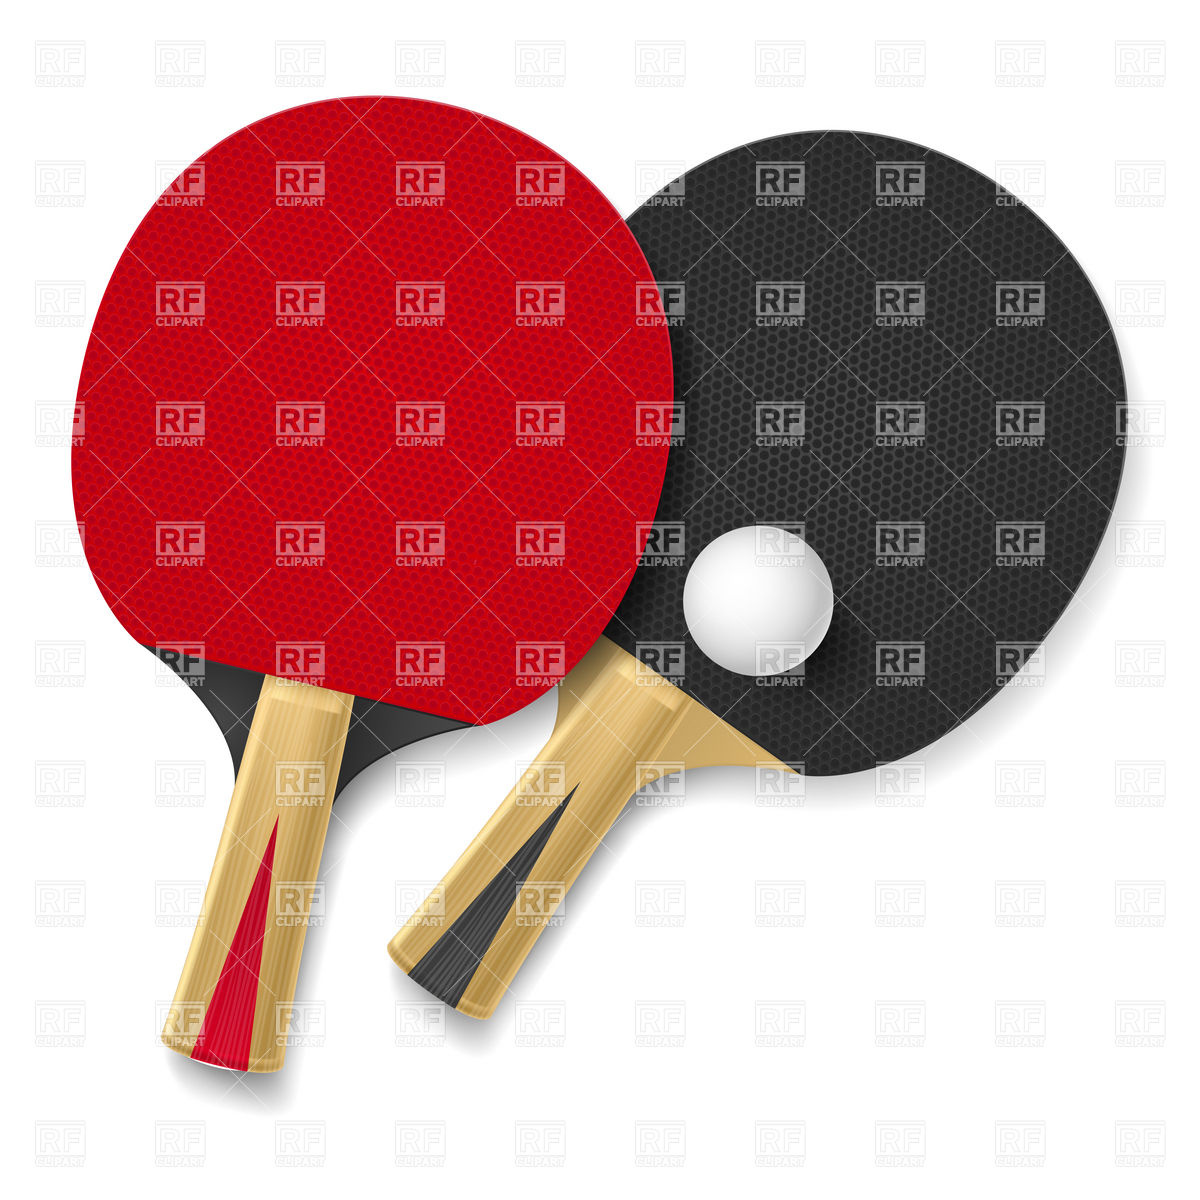 Two Ping Pong Rackets For Playing Table Tennis 16205 Download    